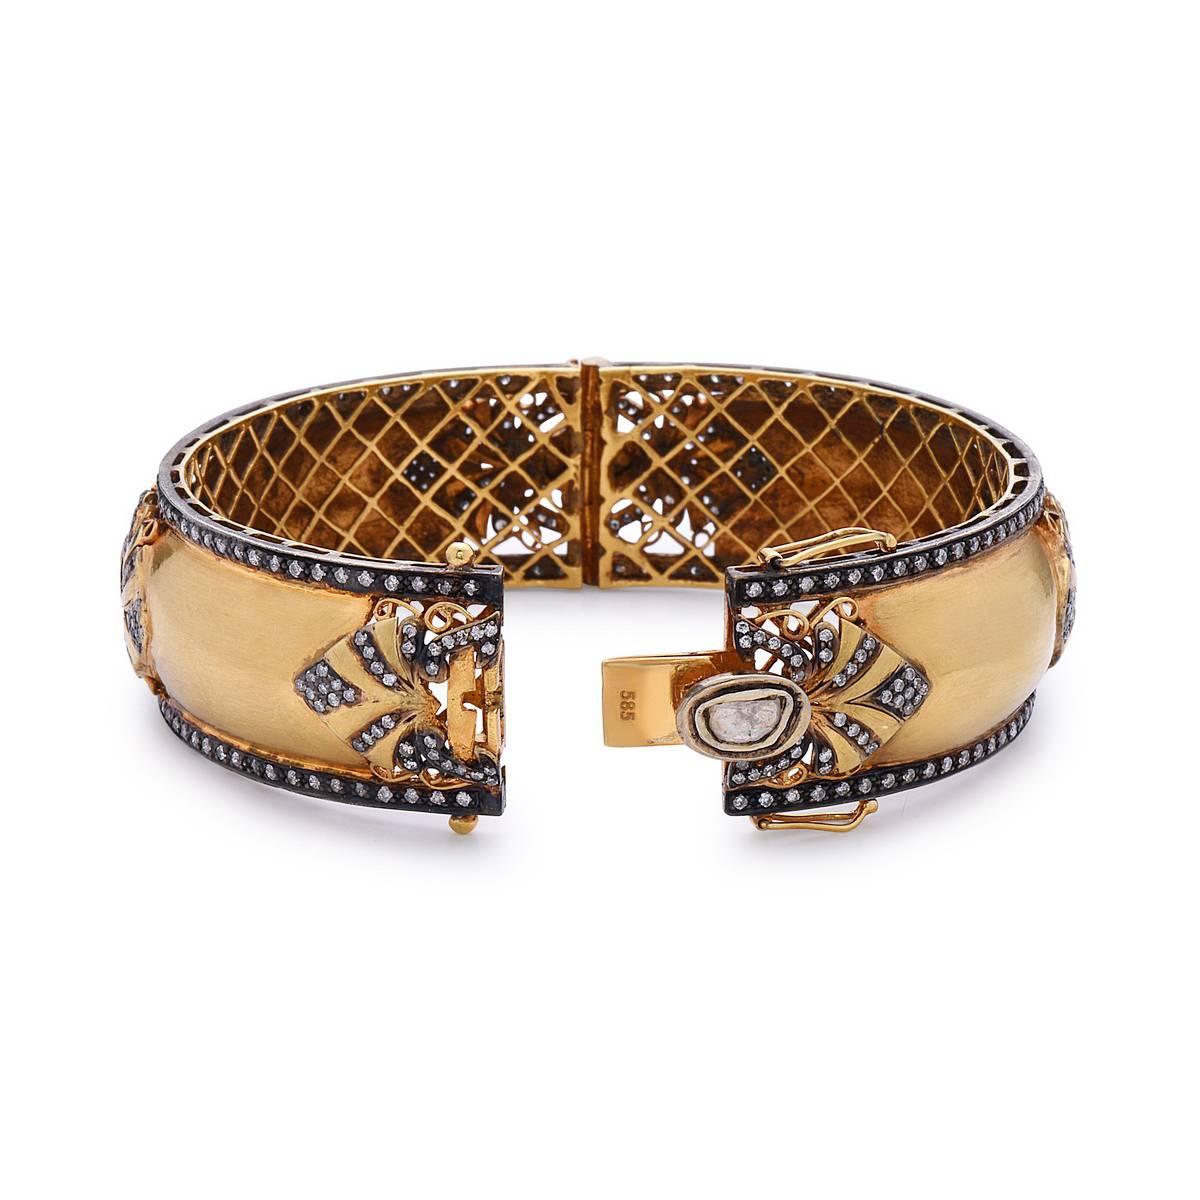 This stunning Gold Bangle with Diamonds has  a beautiful fan motif studded with diamonds on top. This is openable and round in shape with a check grill inside.  

14k:29.4gD:4.22ct                                                                   